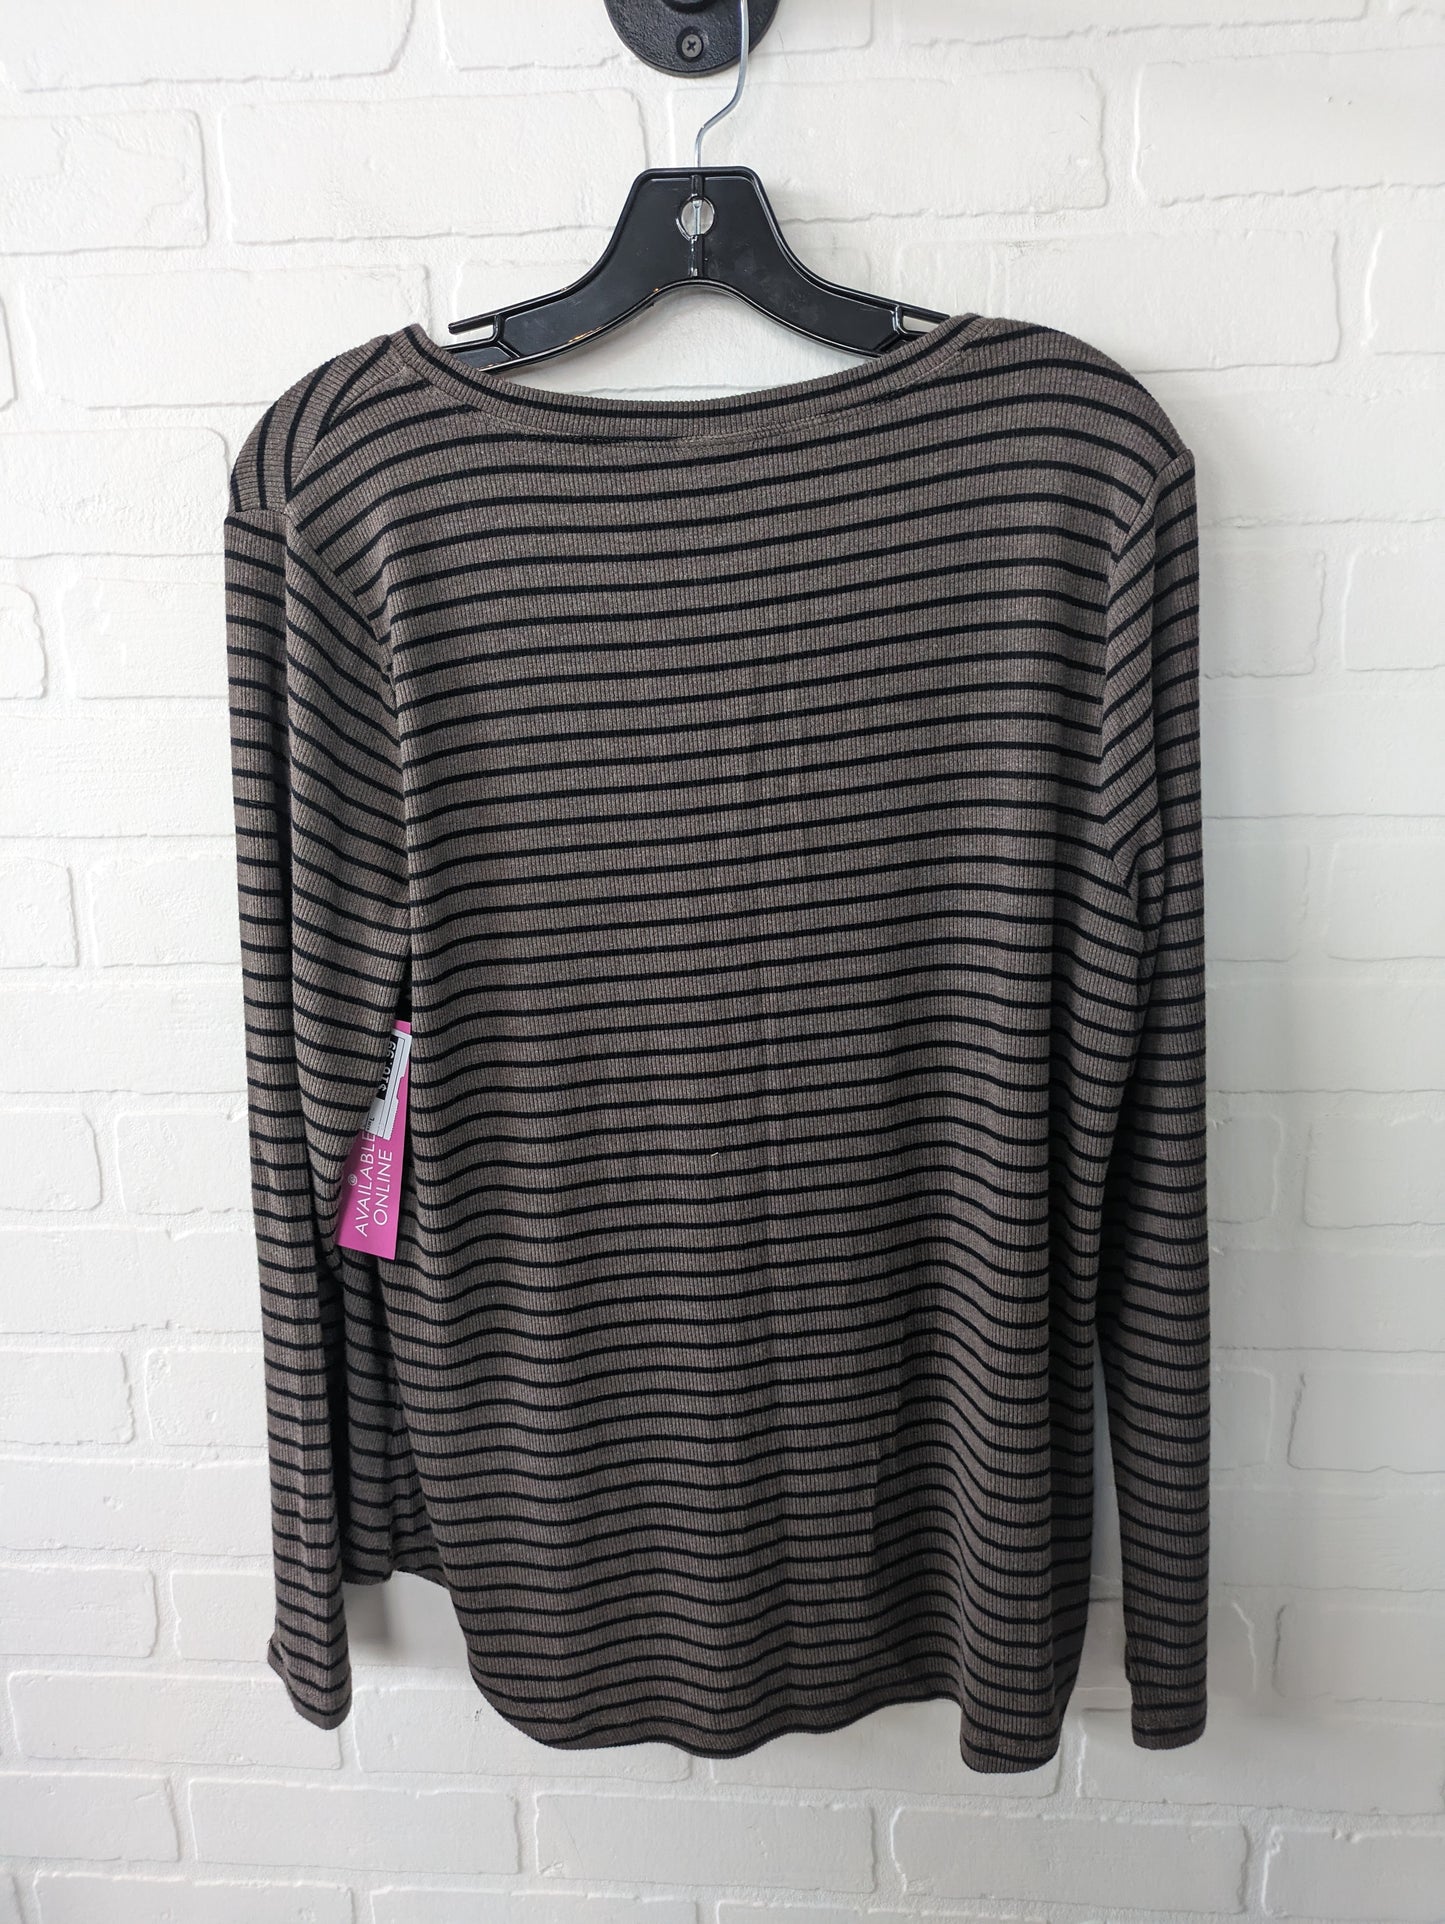 Top Long Sleeve By Cabi  Size: L